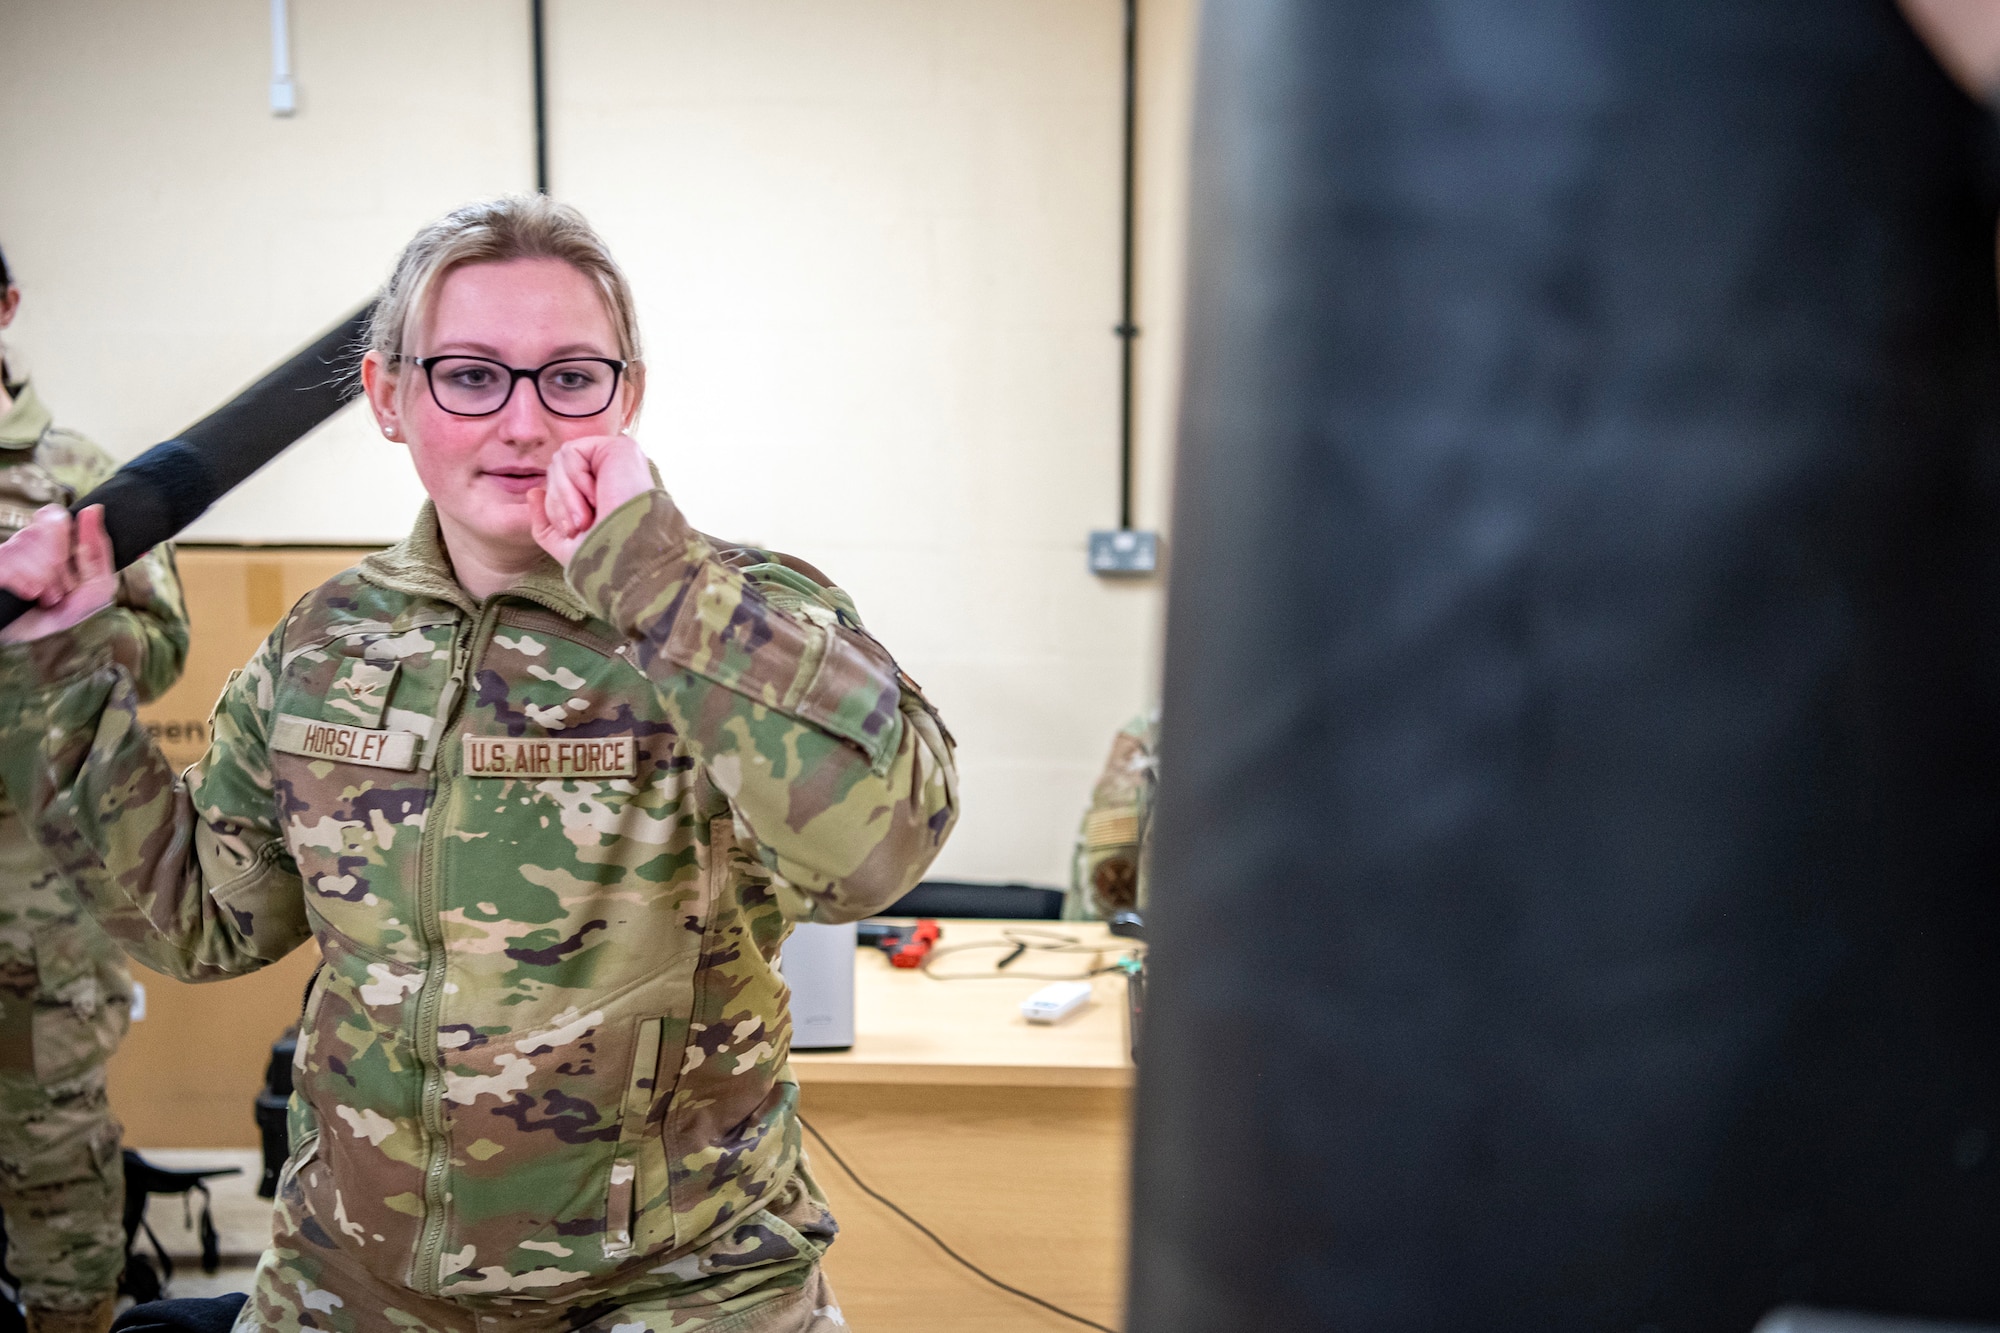 An Airman from the 423d Security Forces Squadron demonstrates a baton strike during a non-lethal combatives qualification course at RAF Alconbury, England, Feb. 7, 2023. The course provided Defenders with the skills and knowledge to properly detain a suspect using non-lethal combative methods. (U.S. Air Force photo by Staff Sgt. Eugene Oliver)